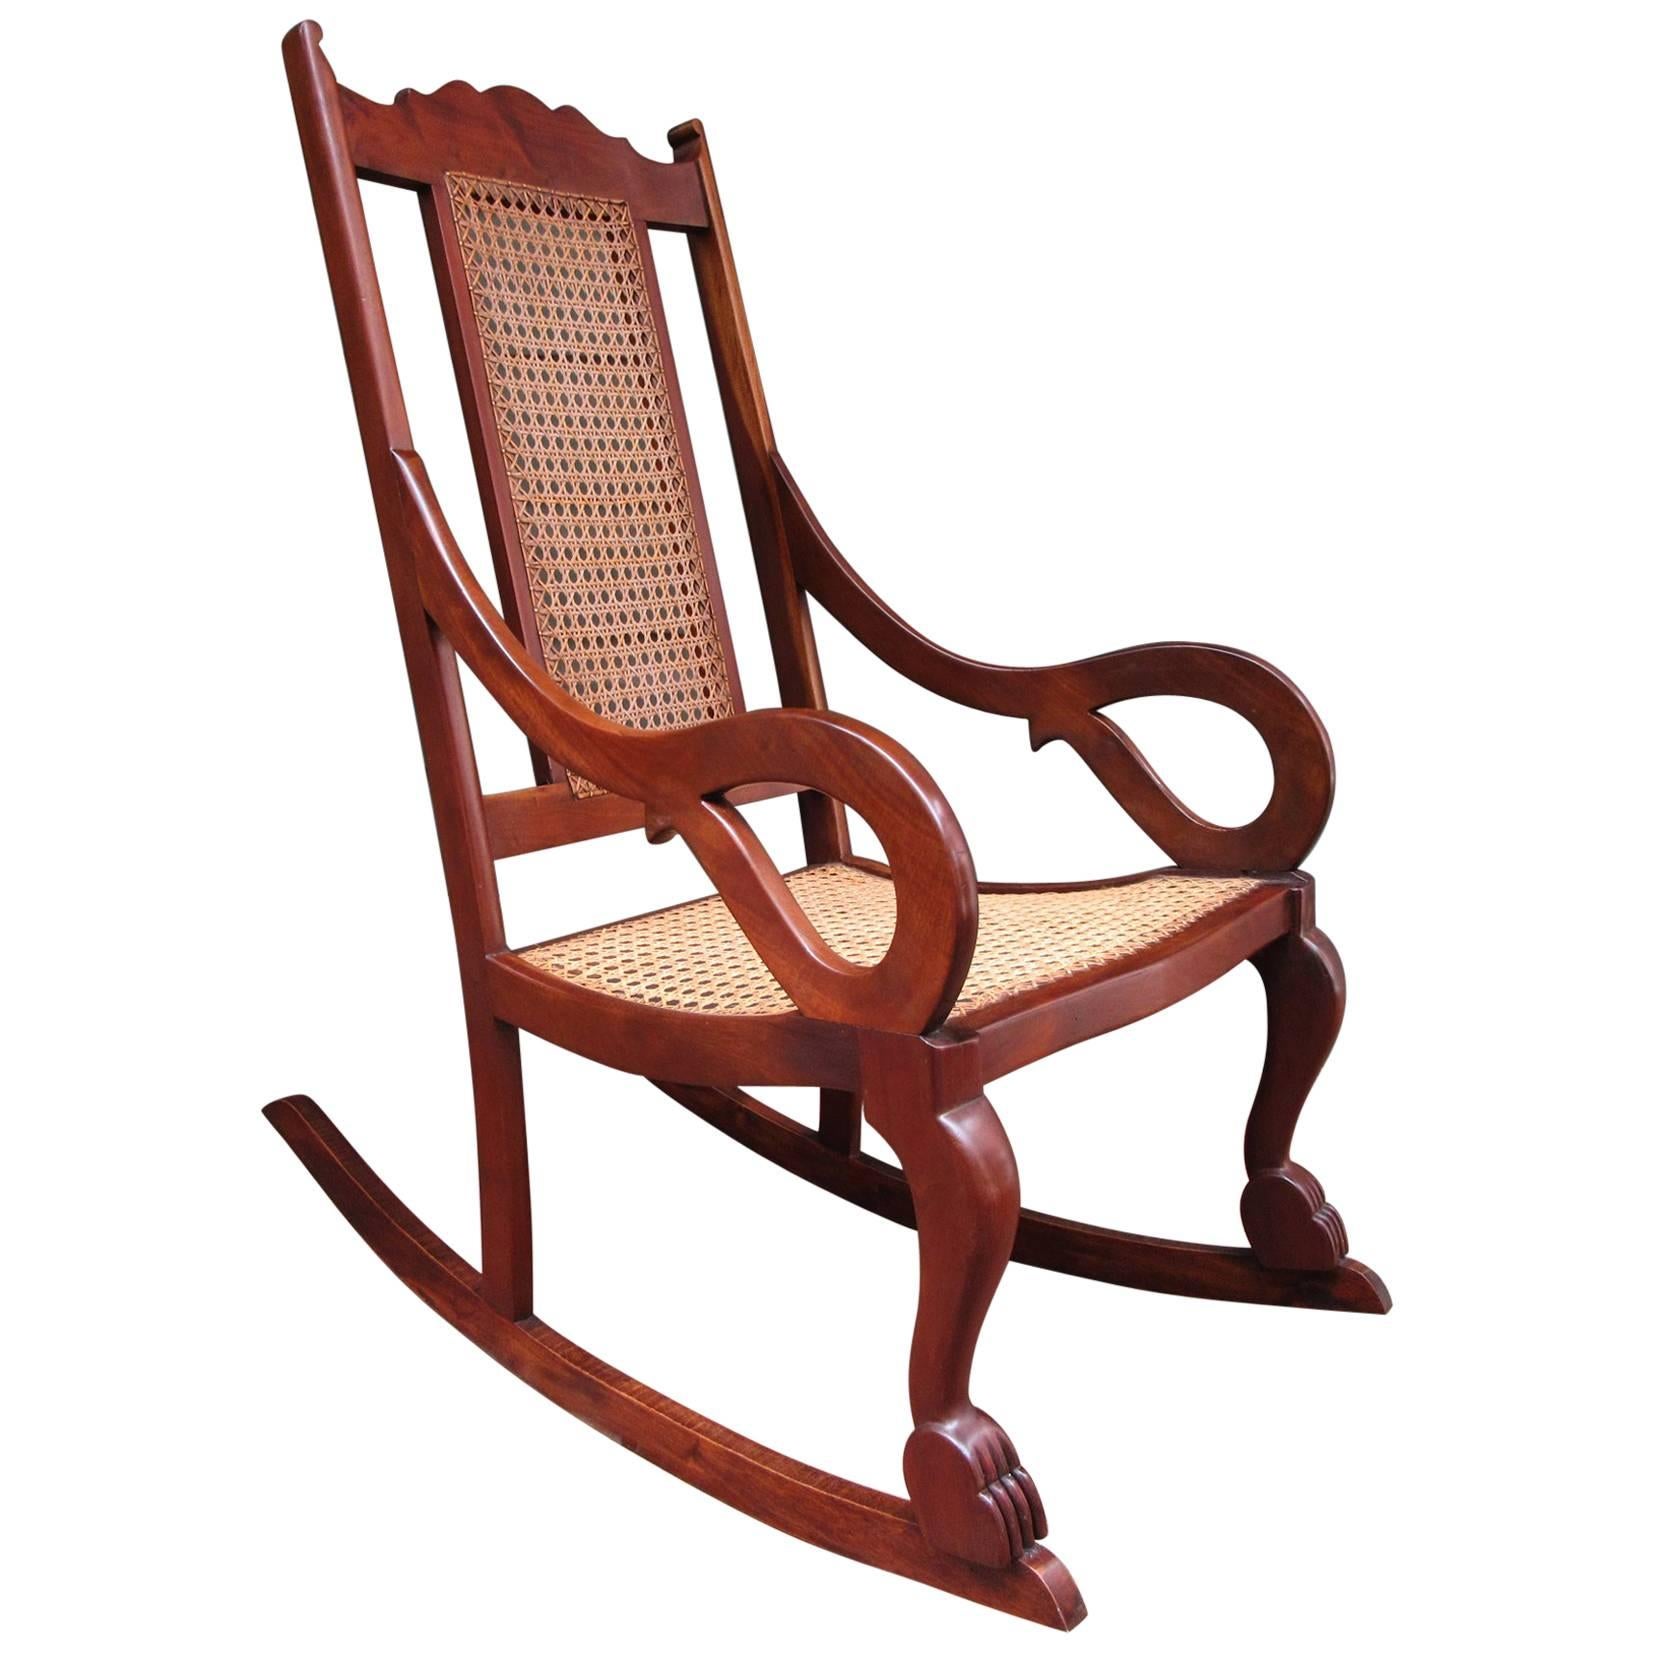 Early 19th Century Caribbean Regency Mahogany and Cane Rocking Chair For Sale